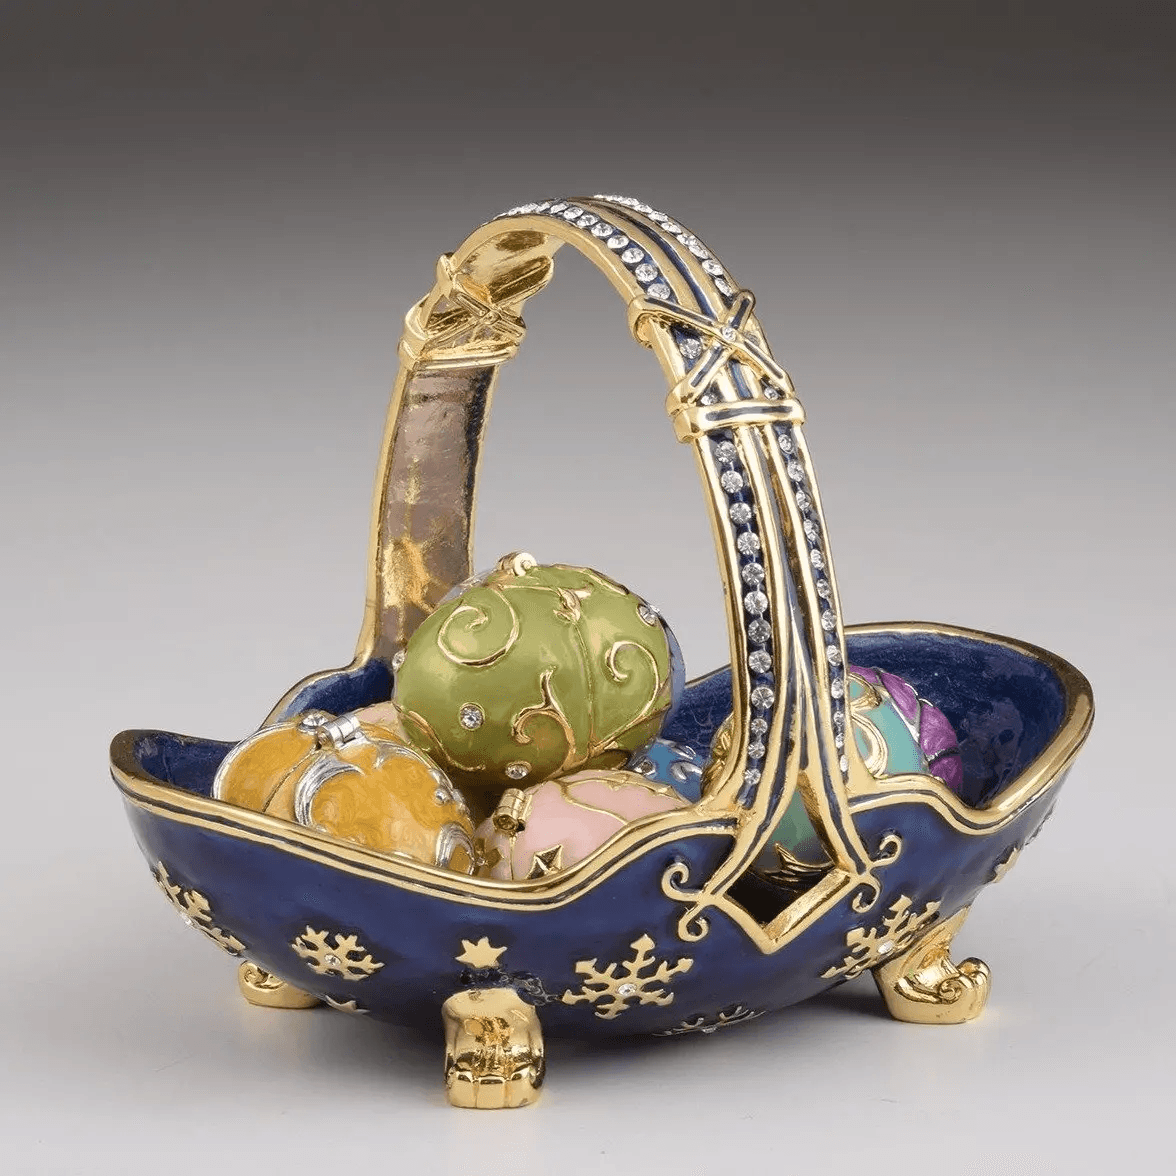 Blue Basket Carring Small Faberge Eggs  